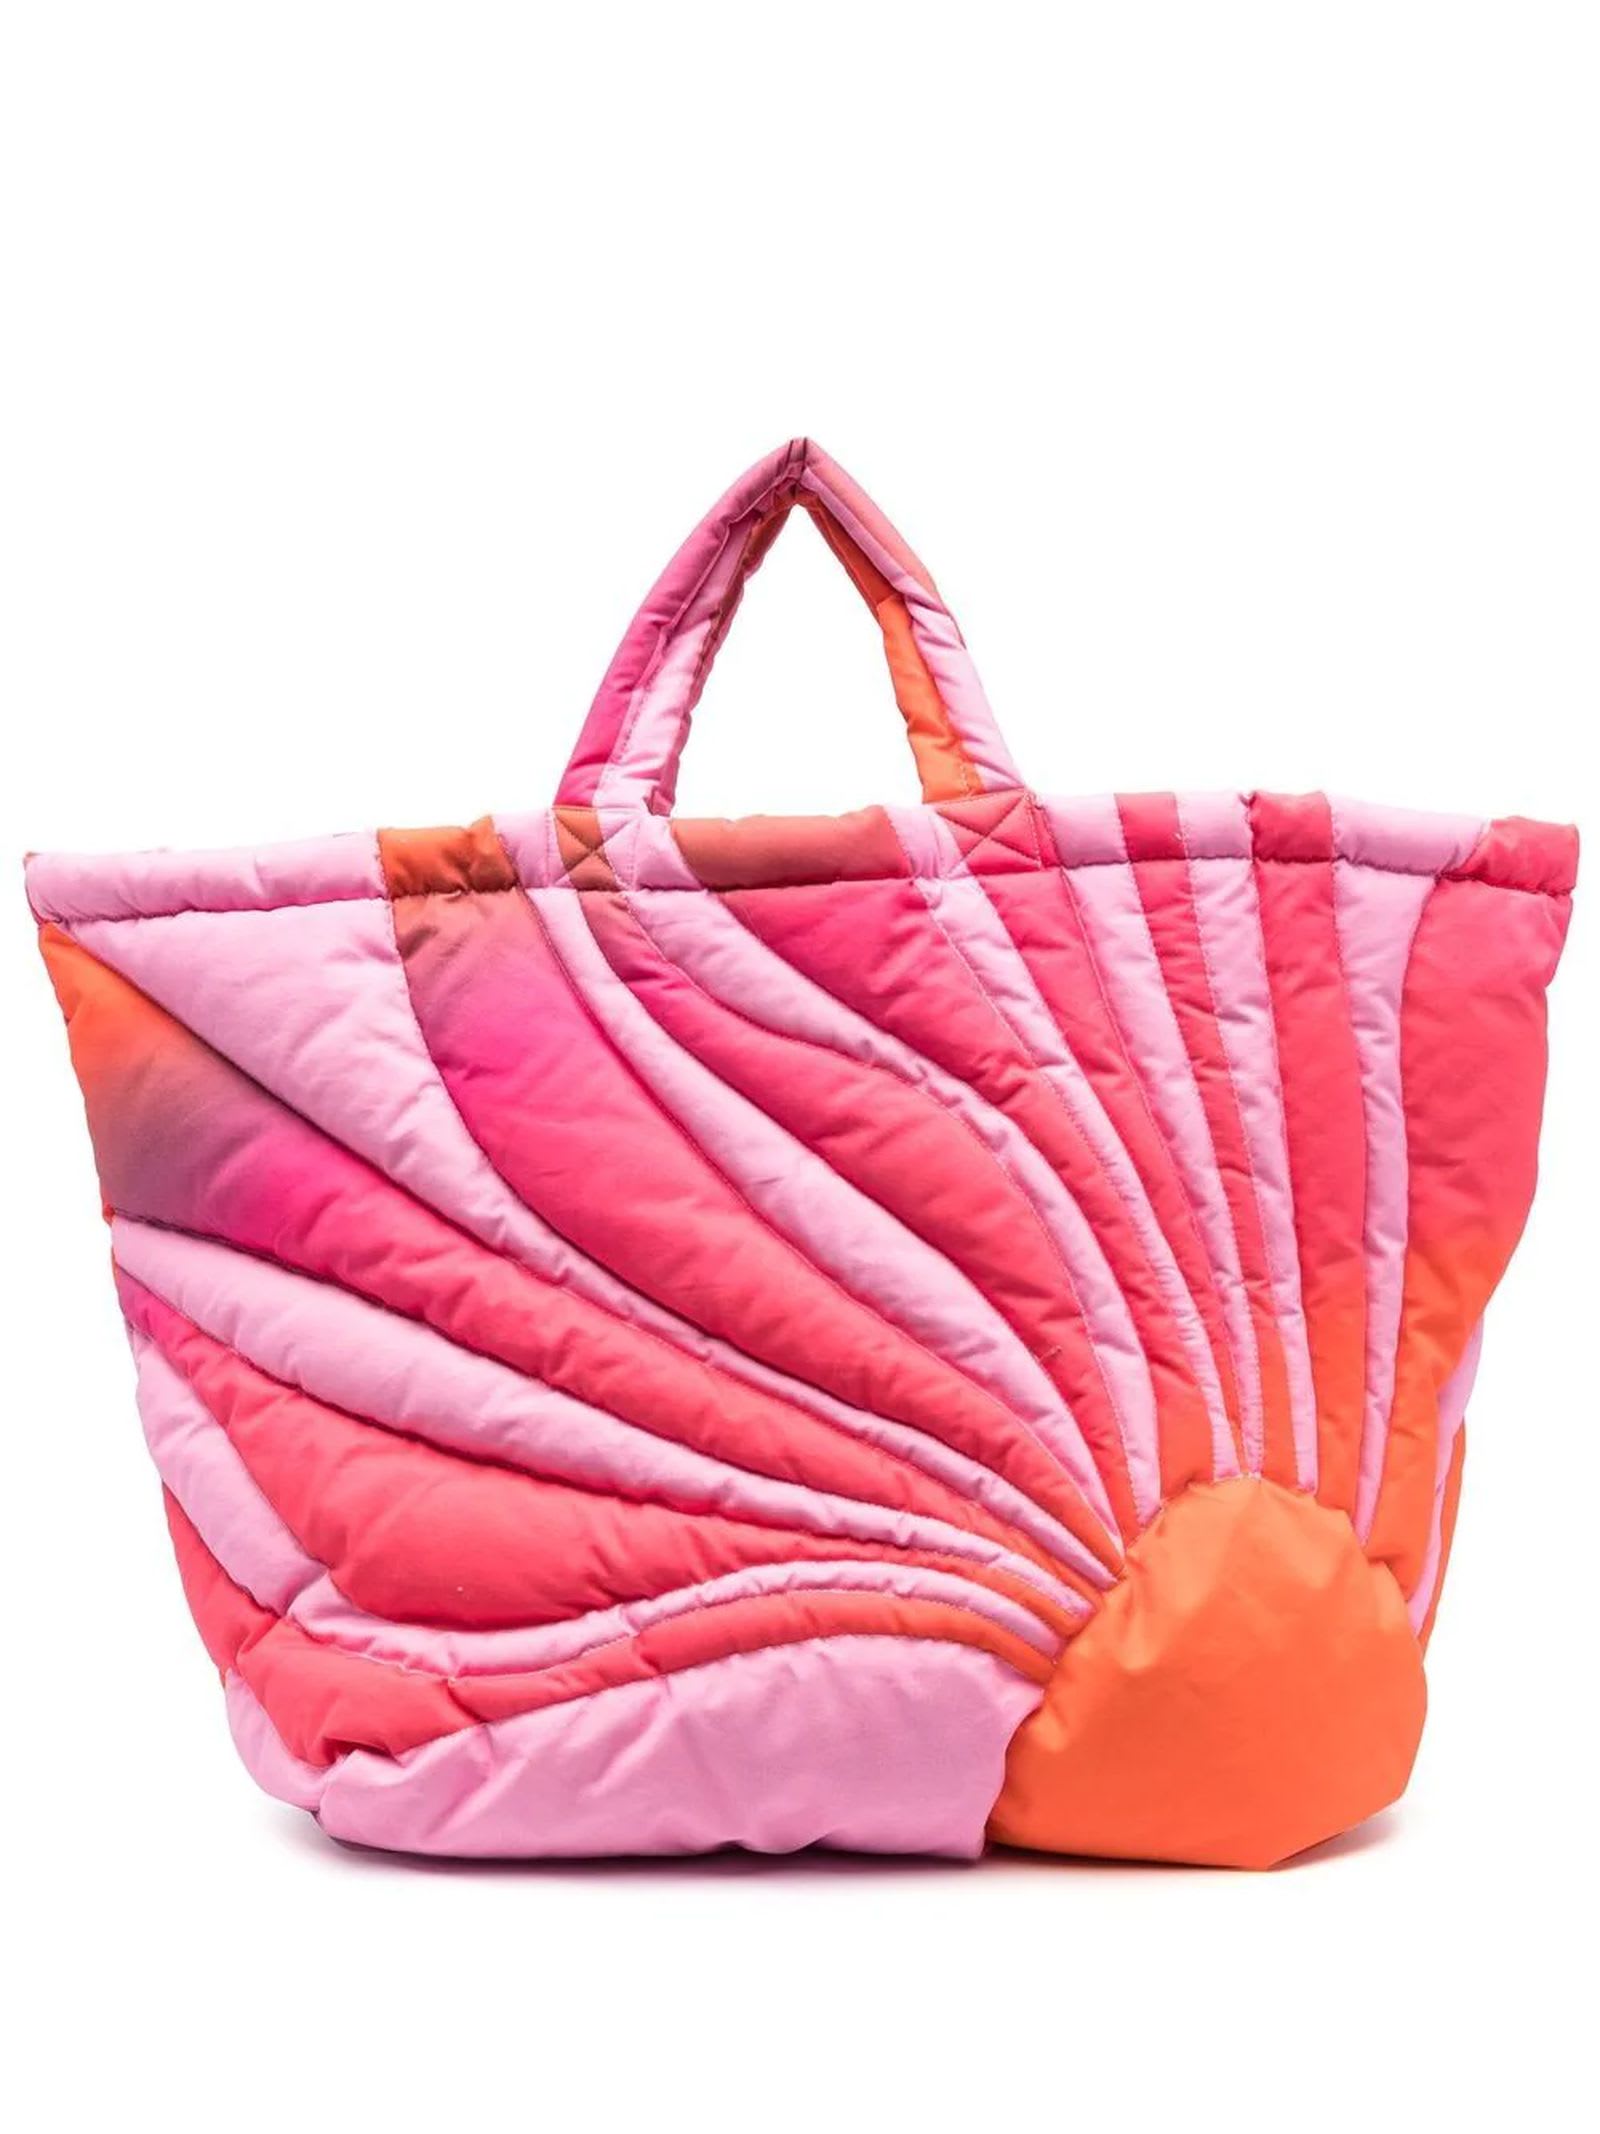 Erl Battleship Pink Sunset Puffer Tote Bag In Rosa